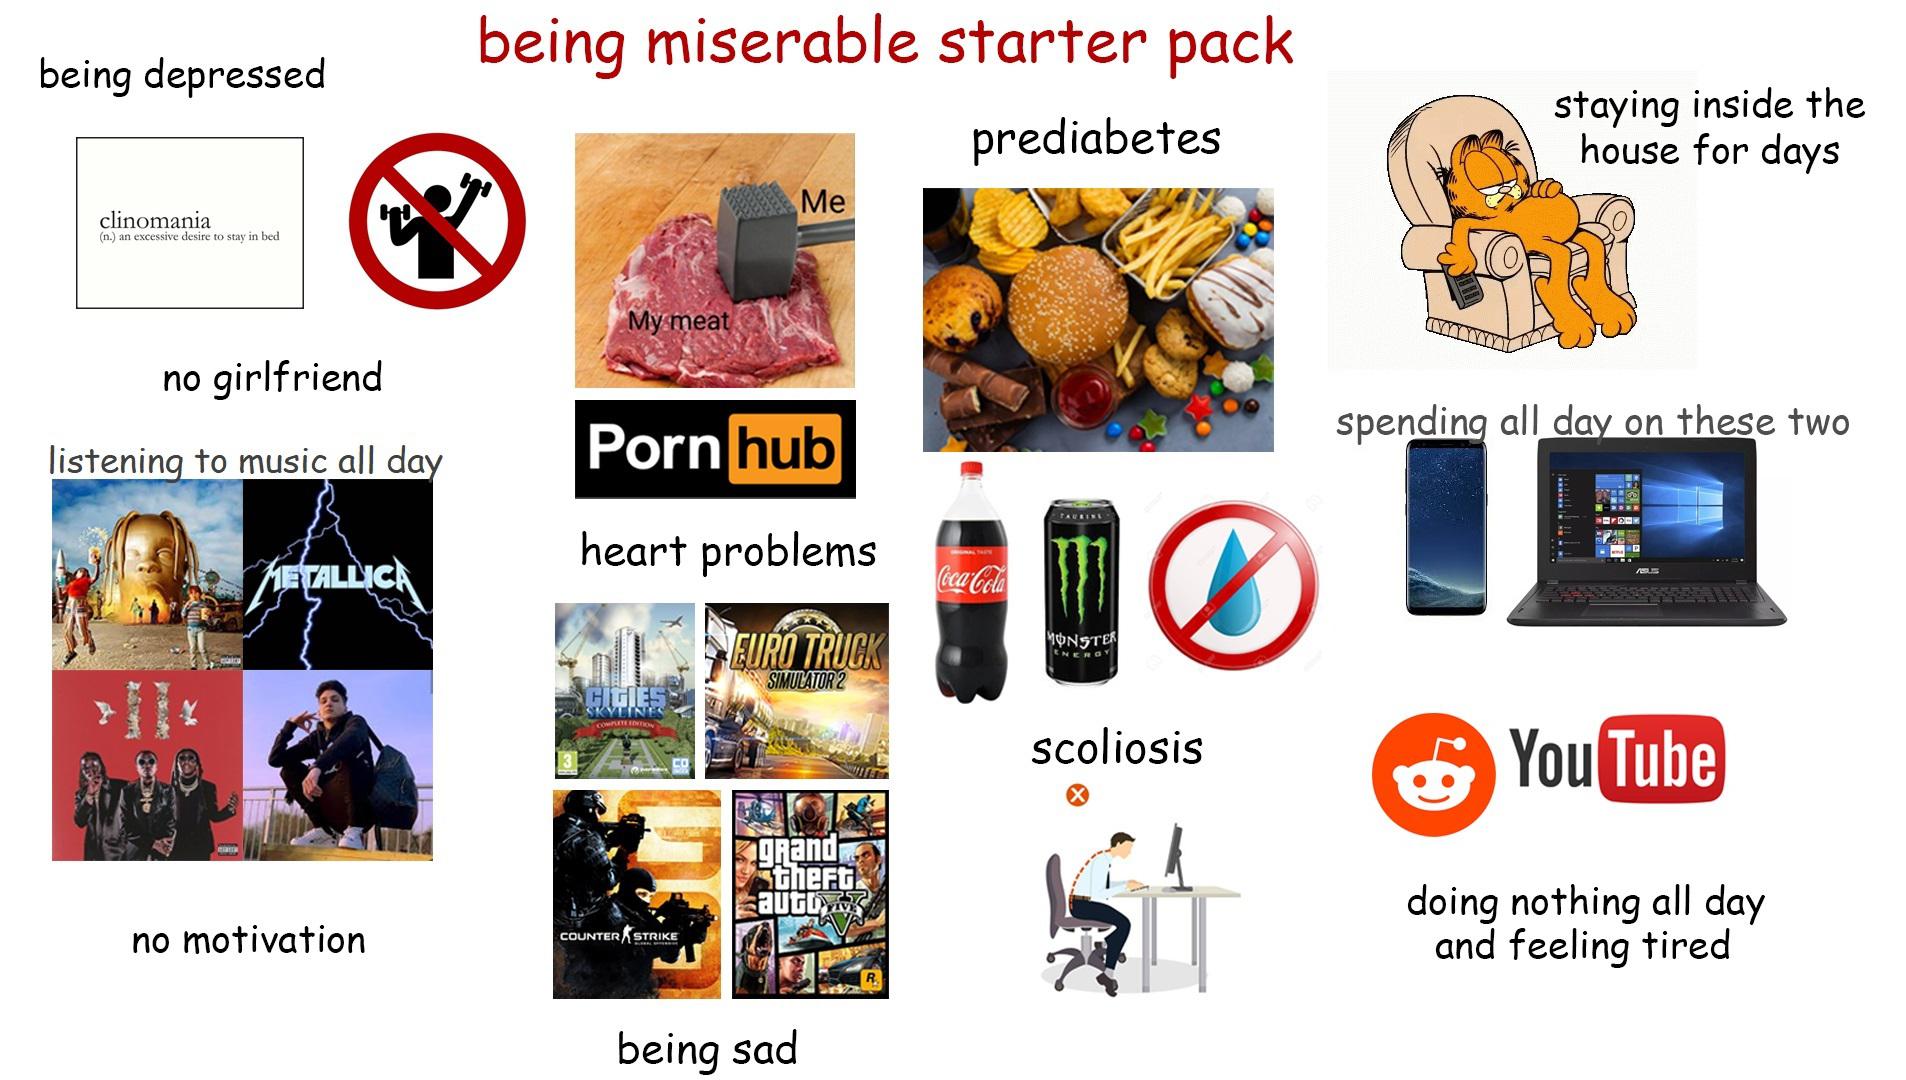 Starter Pack Meme - being depressed being miserable starter pack prediabetes staying inside the house for days Me clinomania n. an excessive desire to stay in bed My meat no girlfriend spending all day on these two listening to music all day Porn hub hear